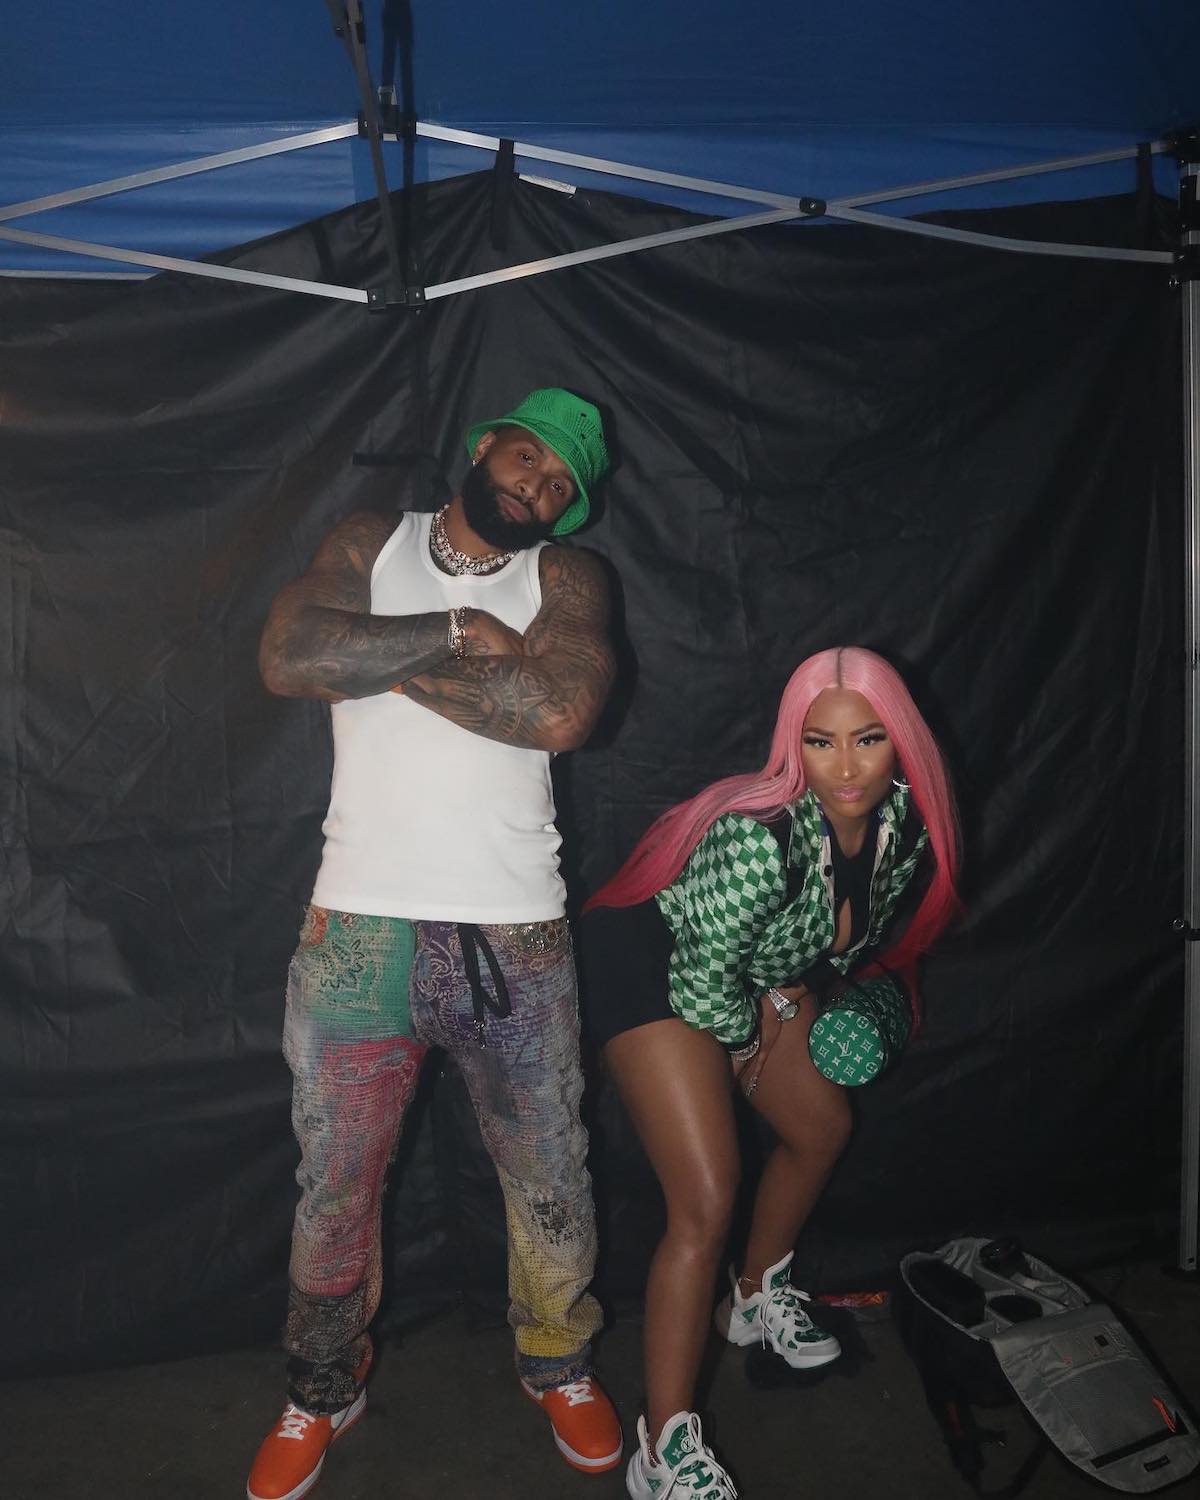 SPOTTED: Odell Beckham Jr. & Nicki Minaj Pose for a Picture in